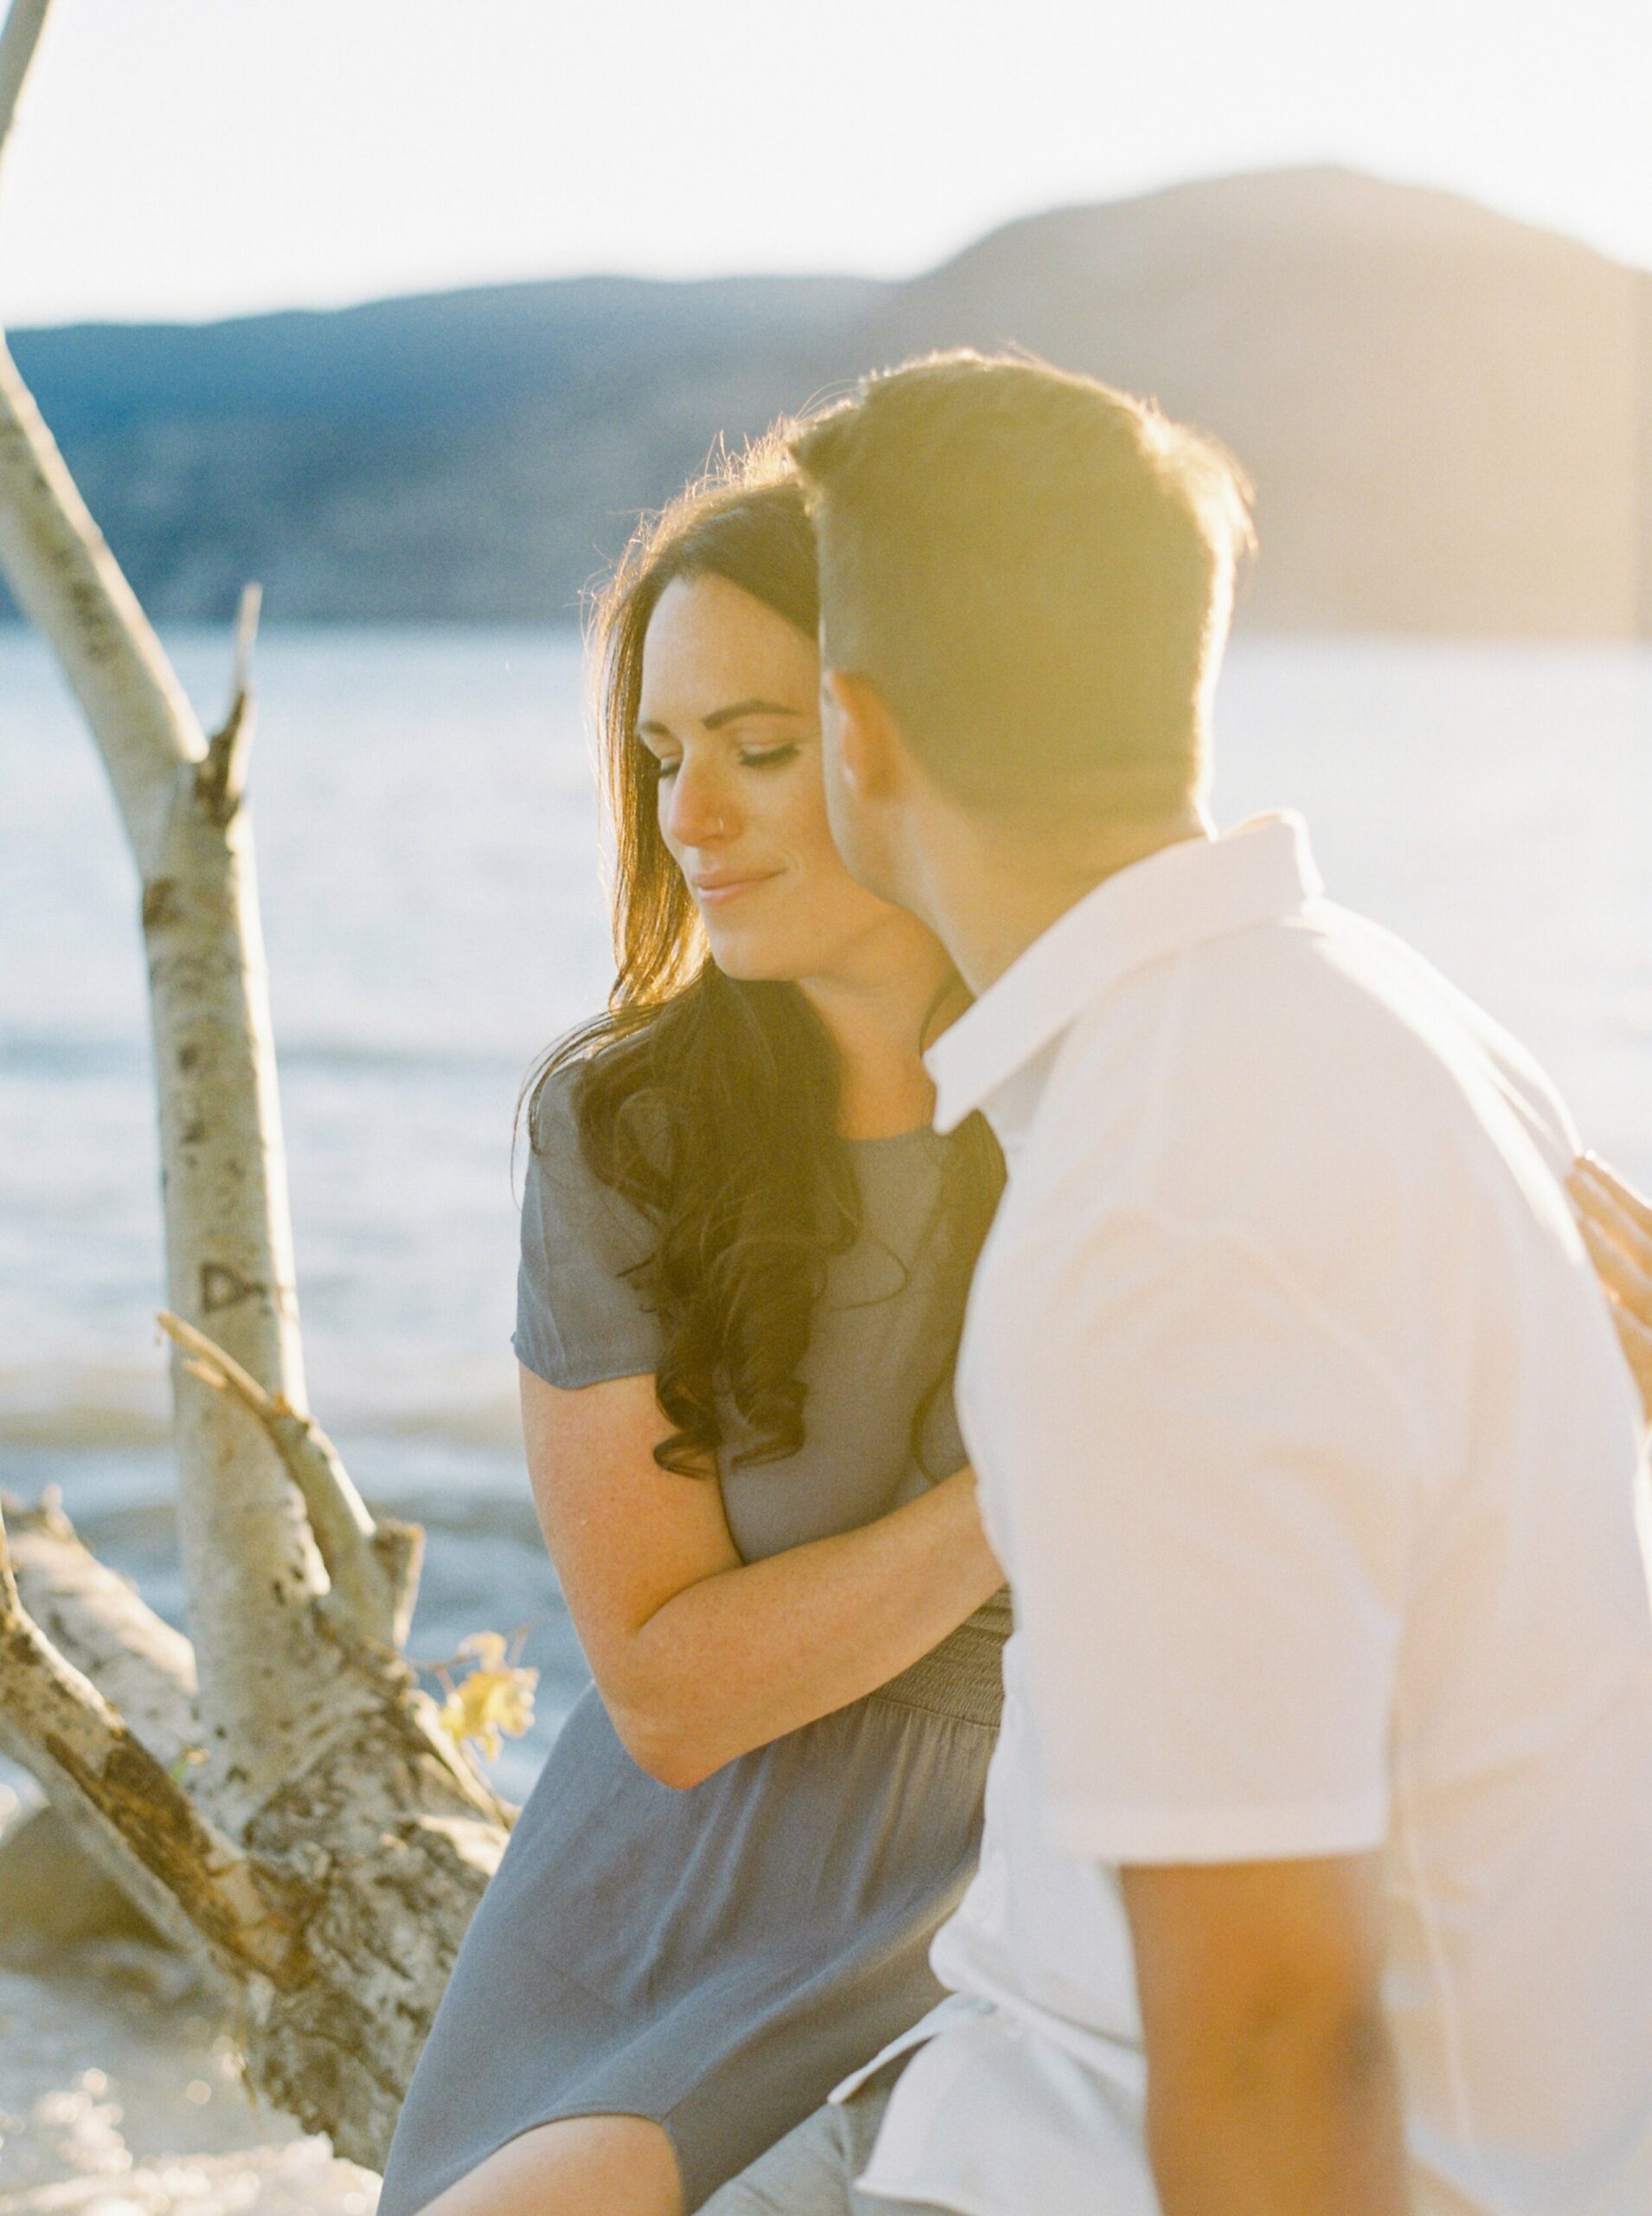  beach session at sunset in kelowna okanagan penticton vineyard on the naramata bench | summer engagement session | outfit ideas for couples photos | film photographer Jusitne Milton 